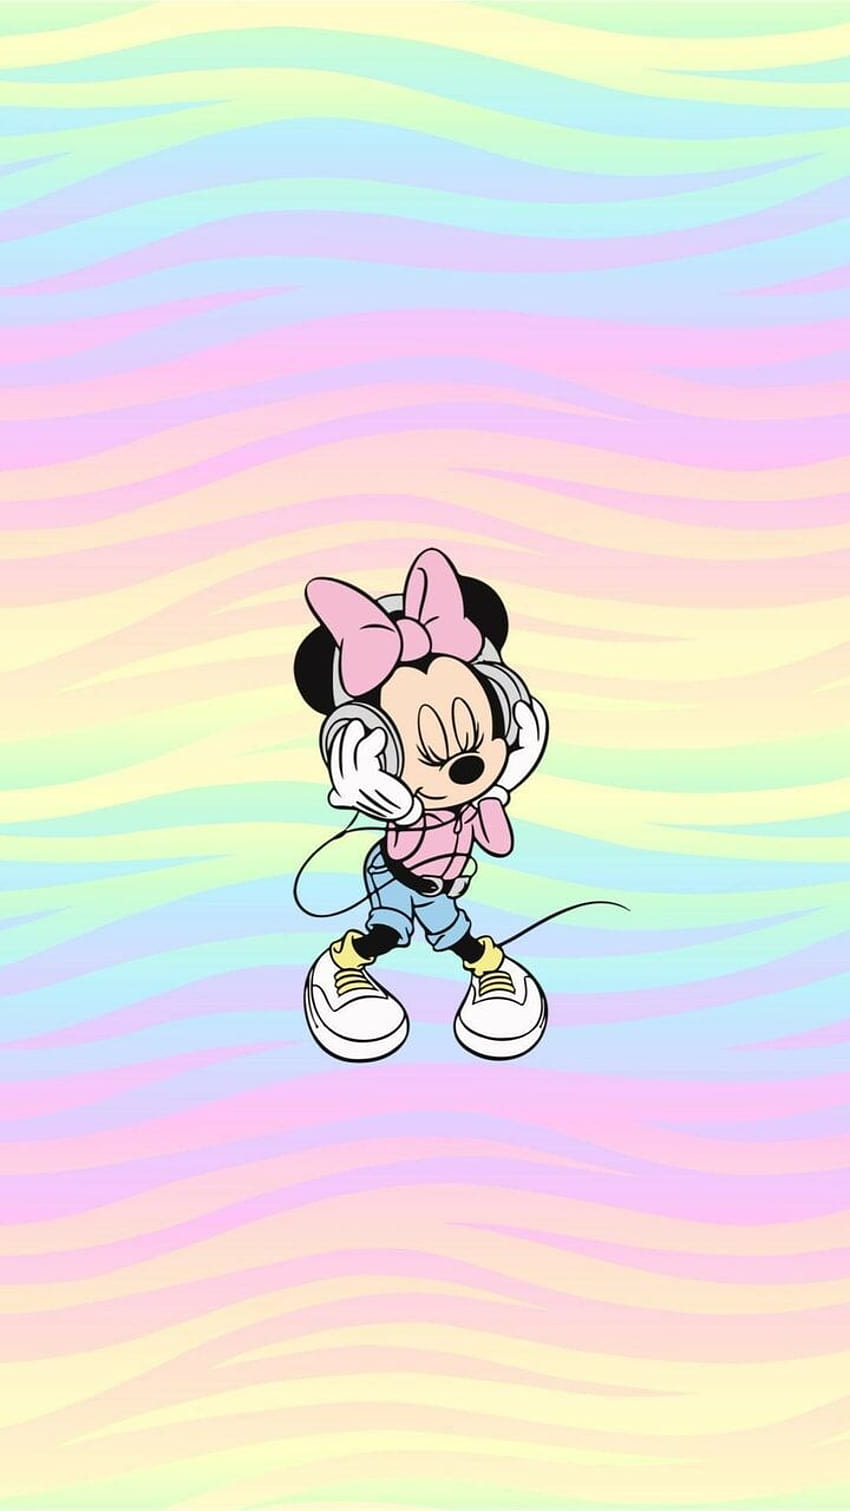 Minnie Mouse via Twitter Credit to the Artist, aesthetic minnie mouse HD phone wallpaper